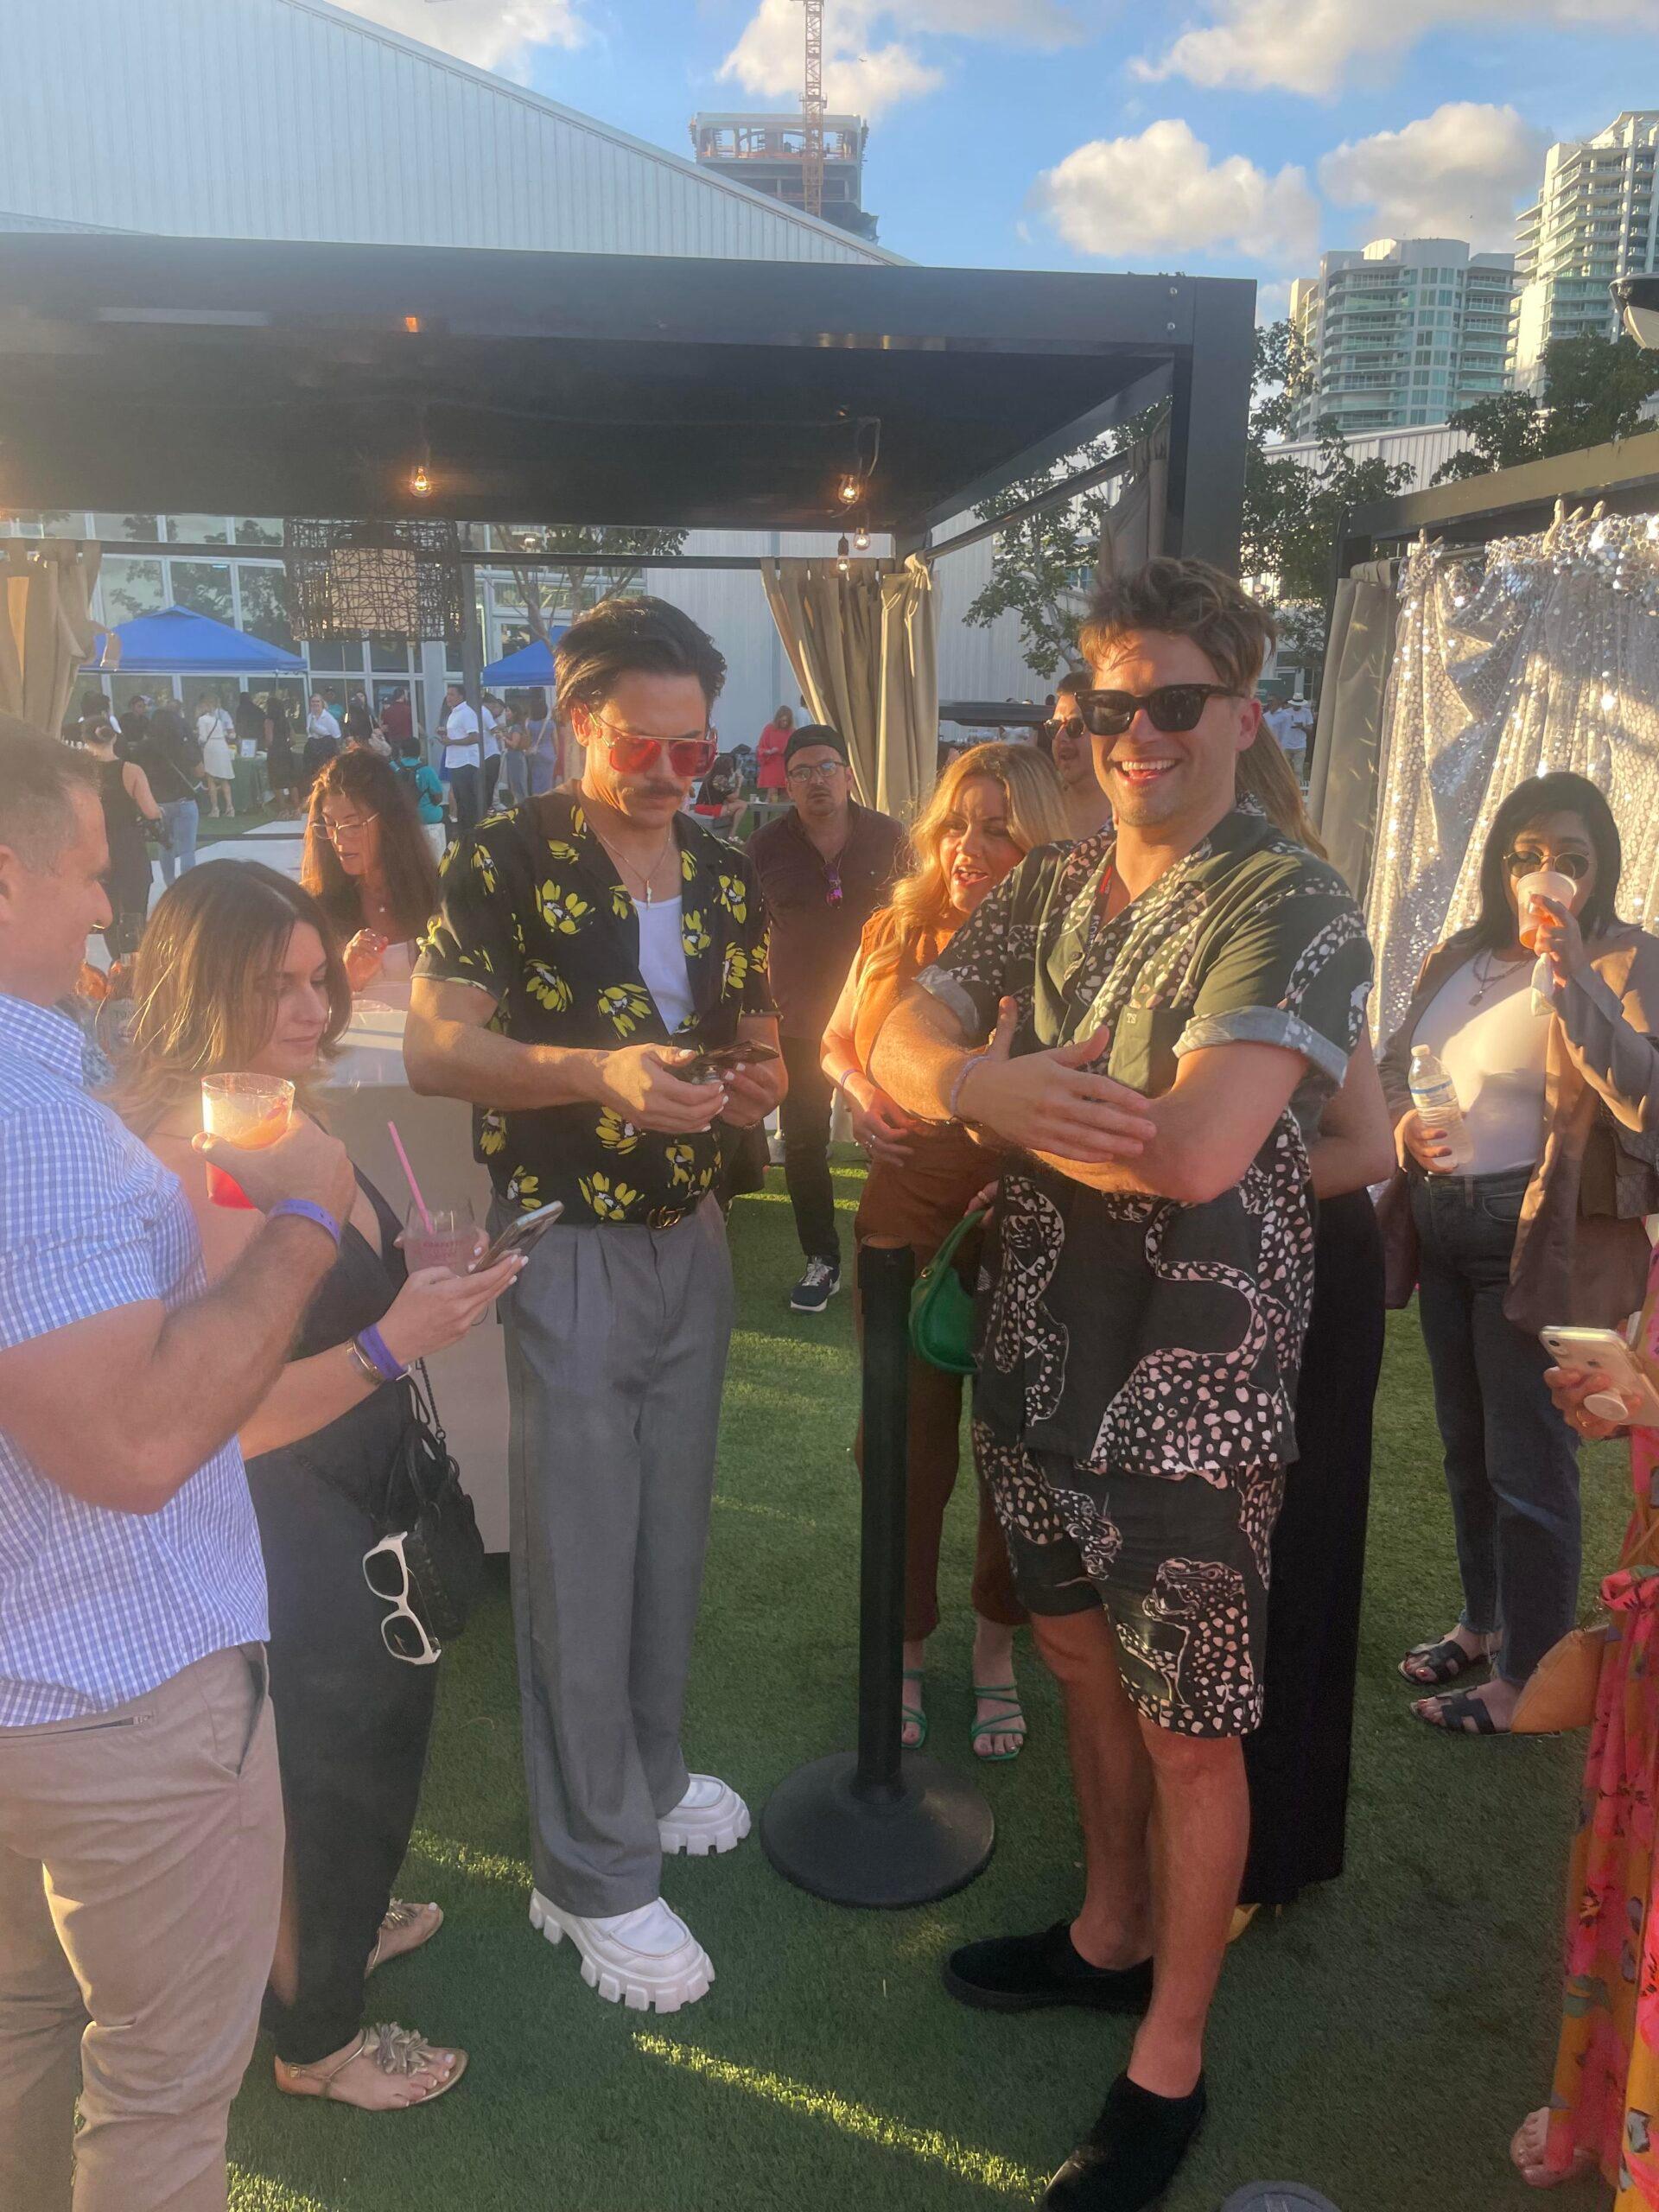 Tom Schwartz and Tom Sandoval make drinks for guests as they party at food and wine festival in Miami